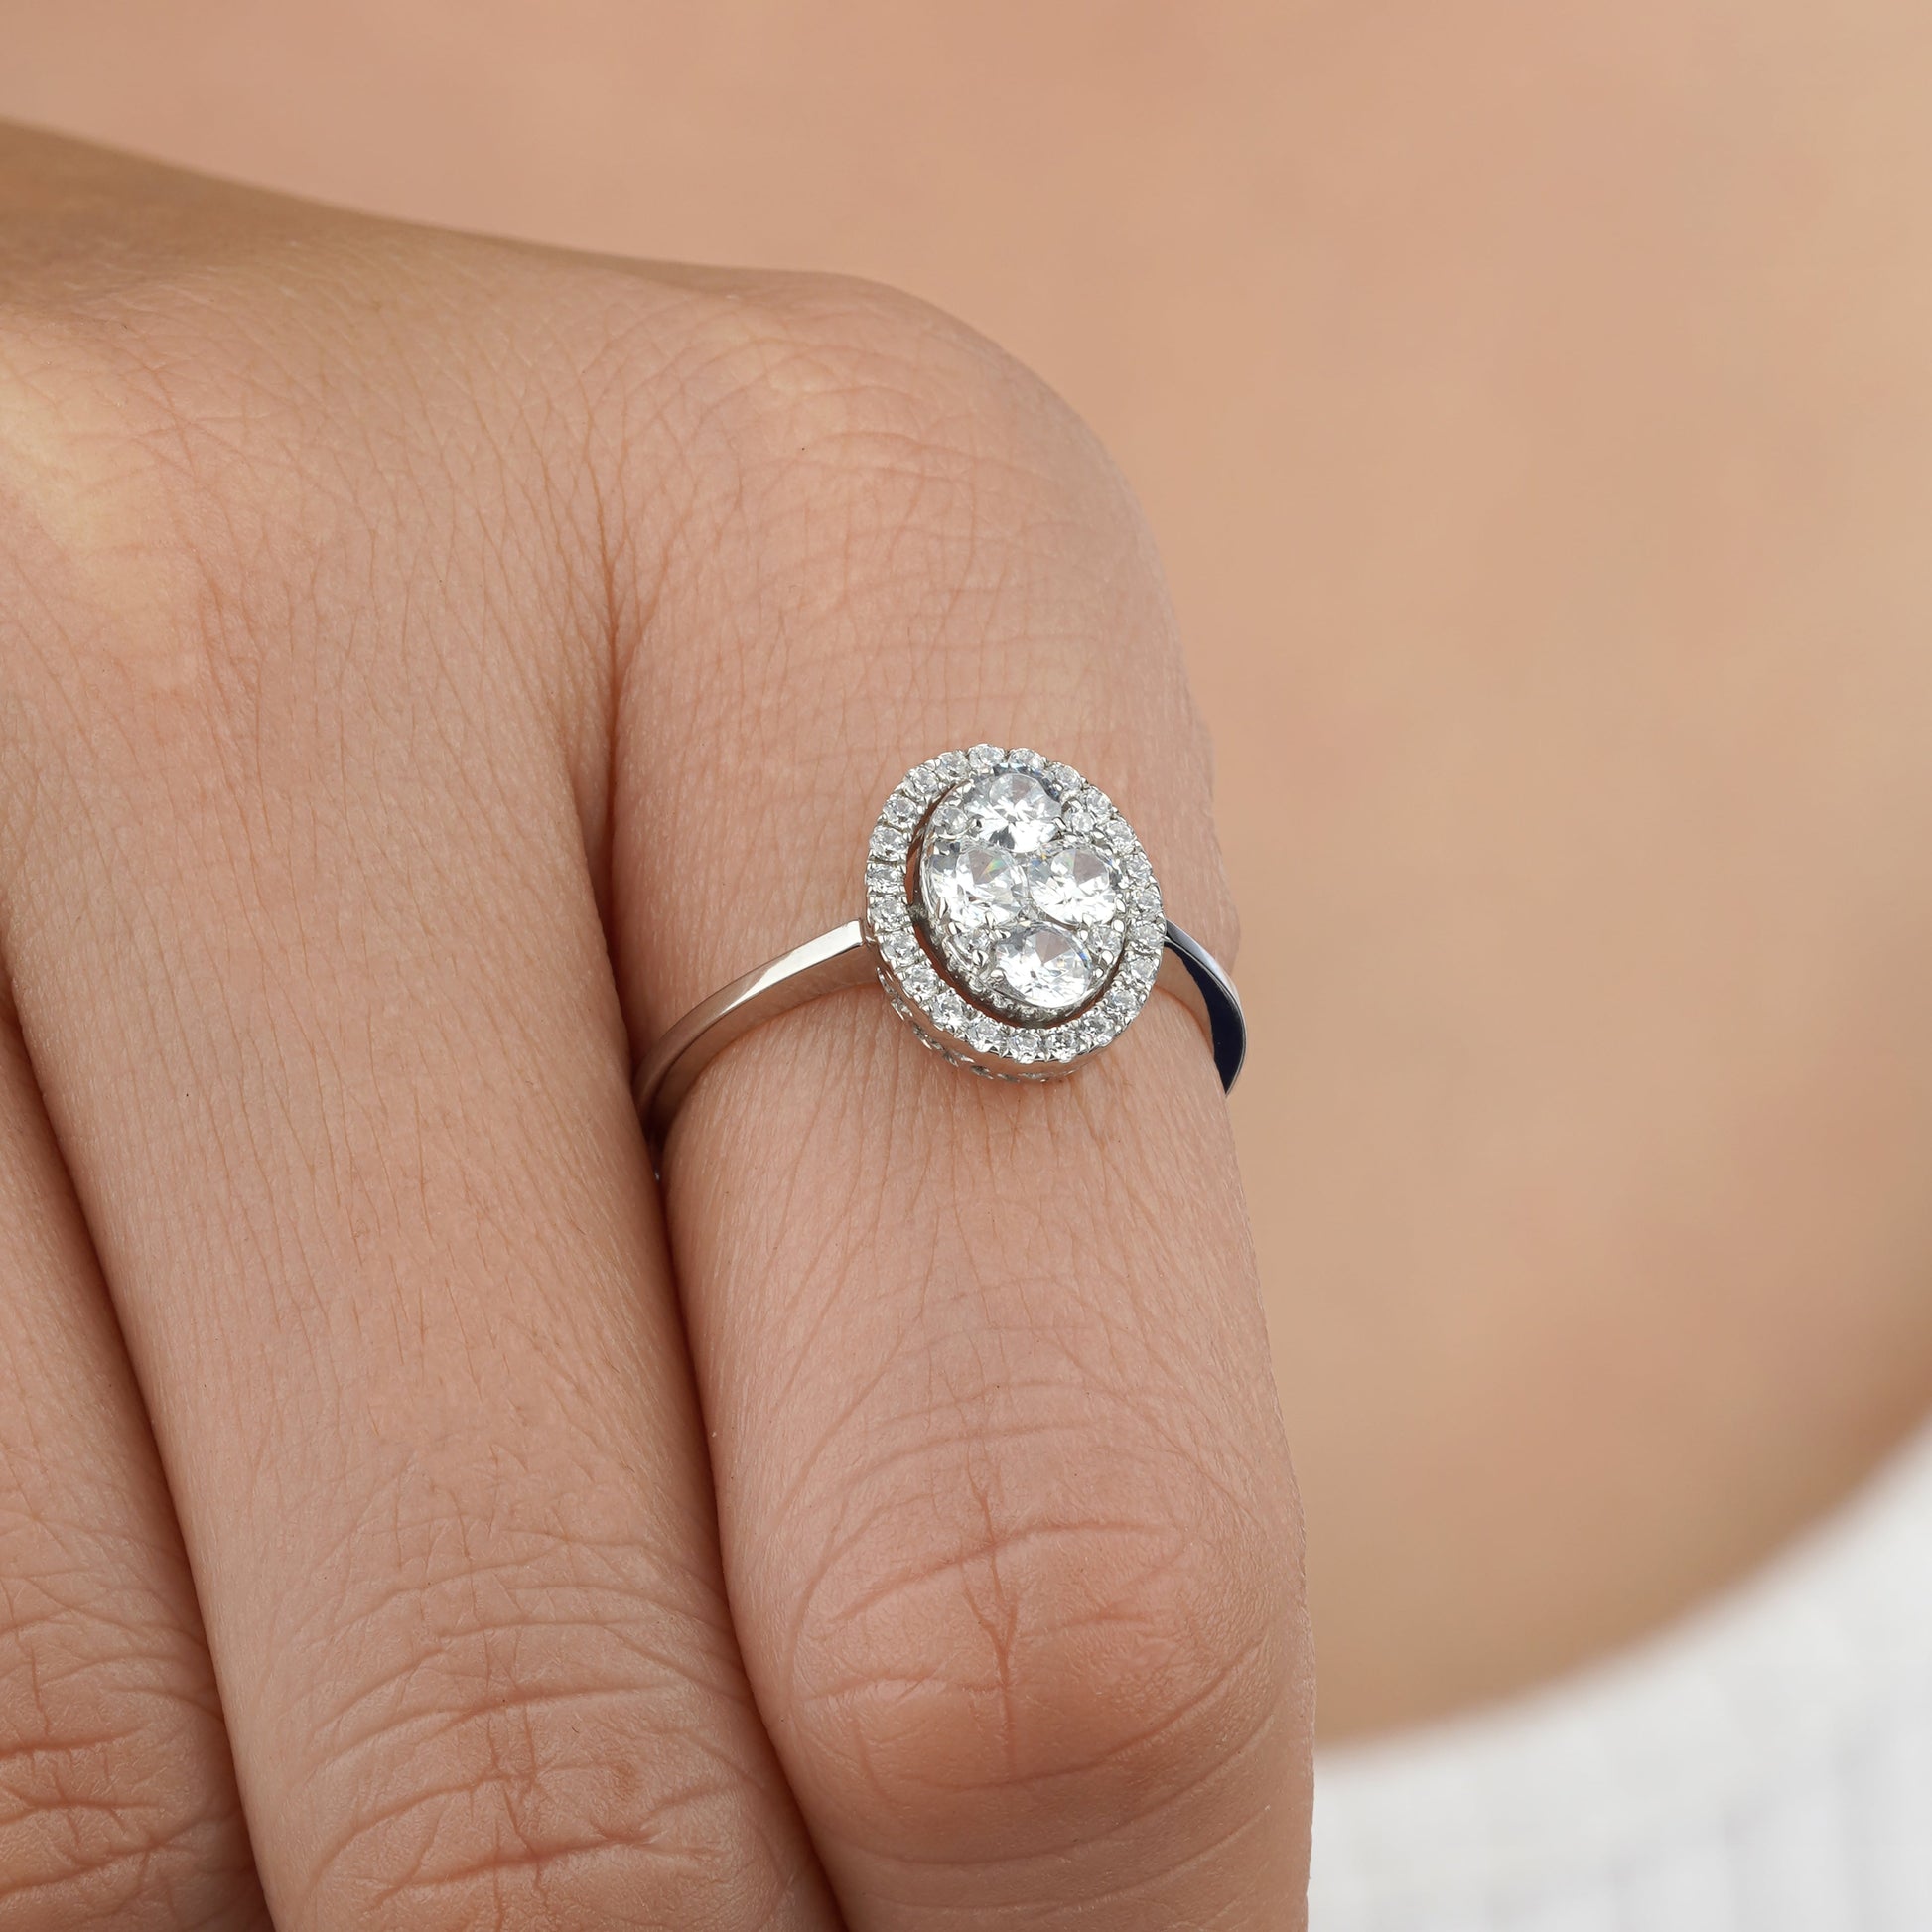 Diamond Engagement Ring on her